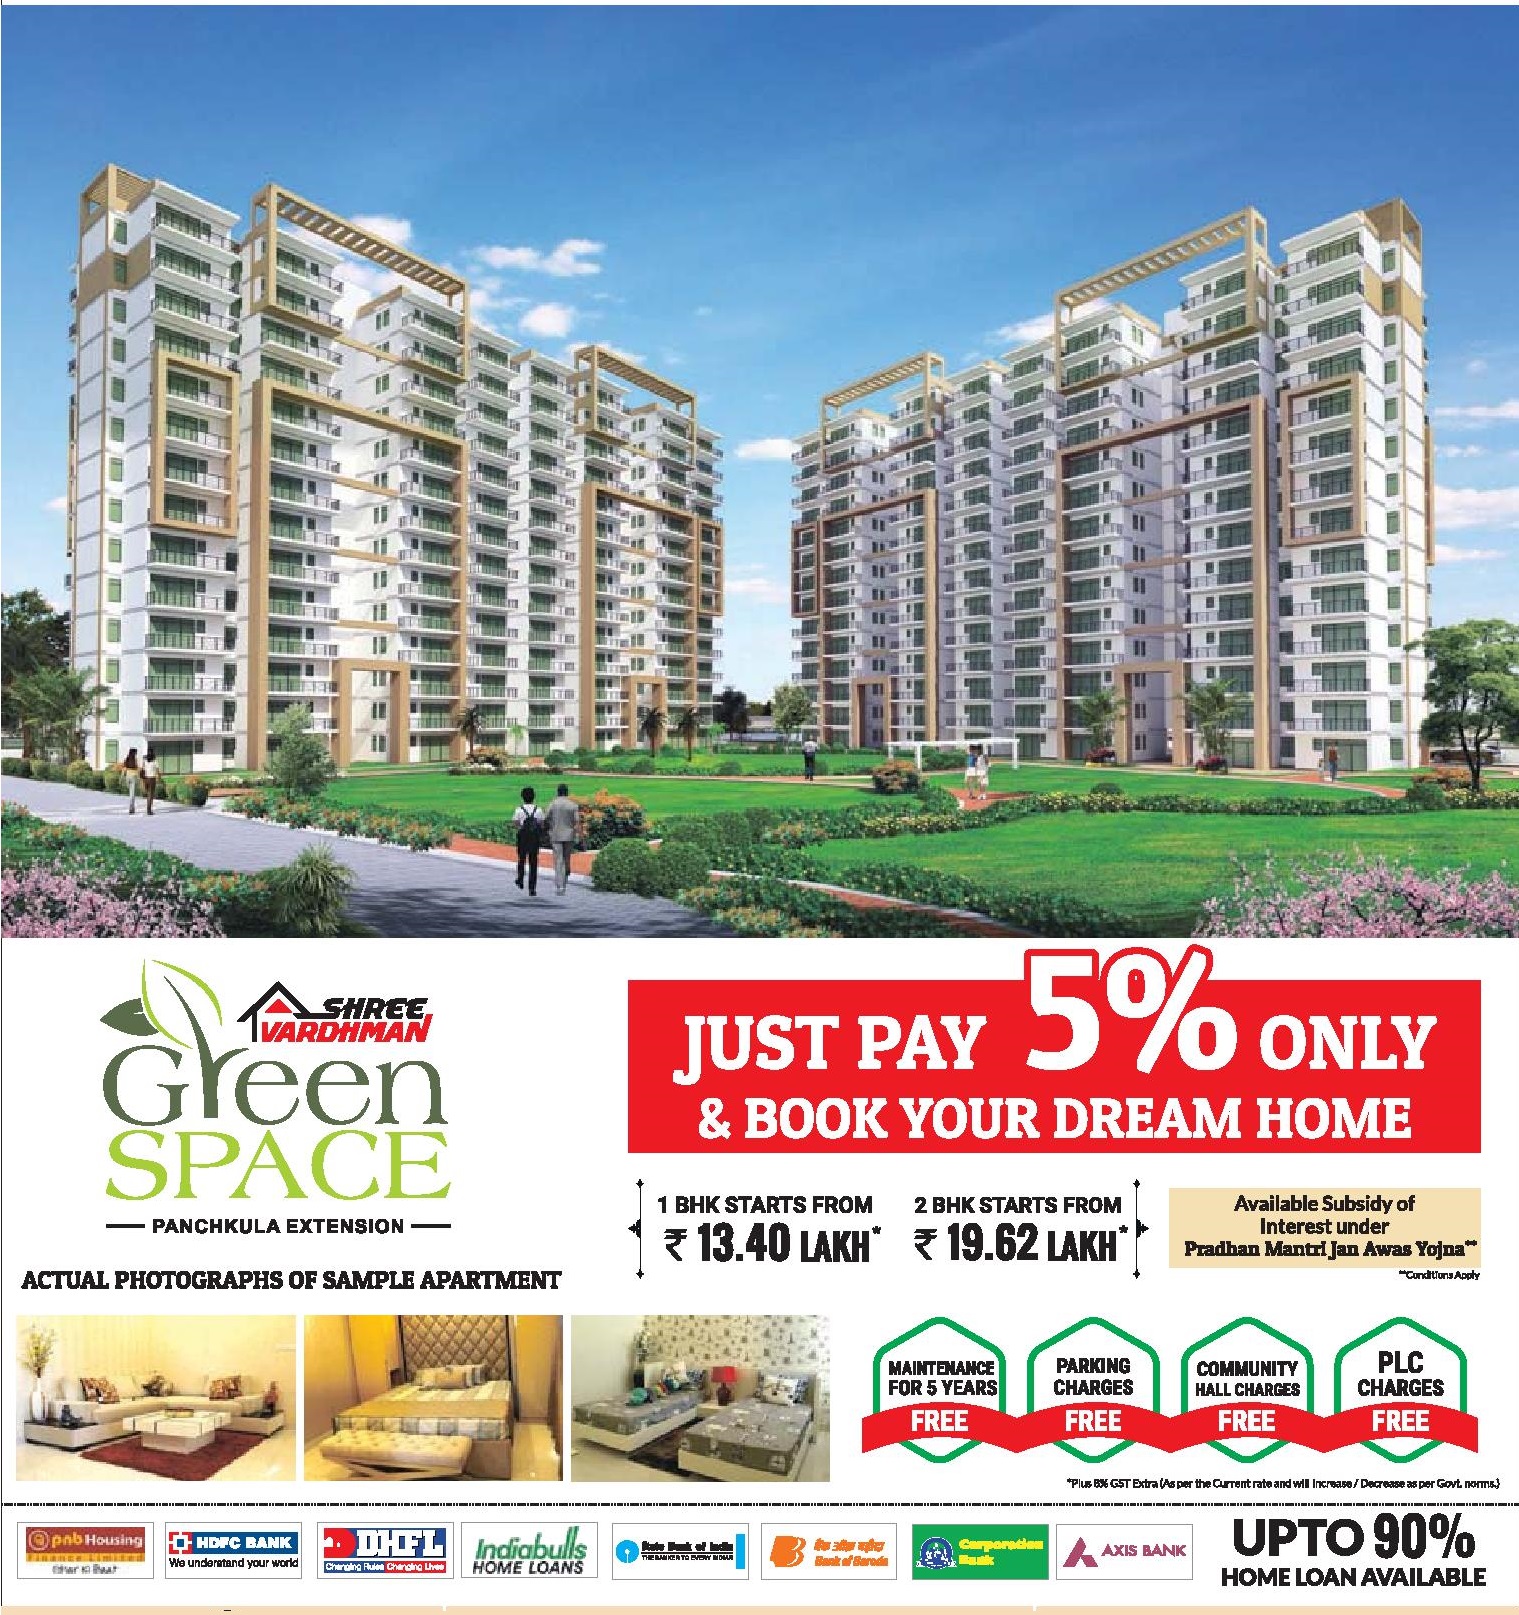 Pay 5% only & book your dream home at Shree Vardhman Green Space in Panchkula Update